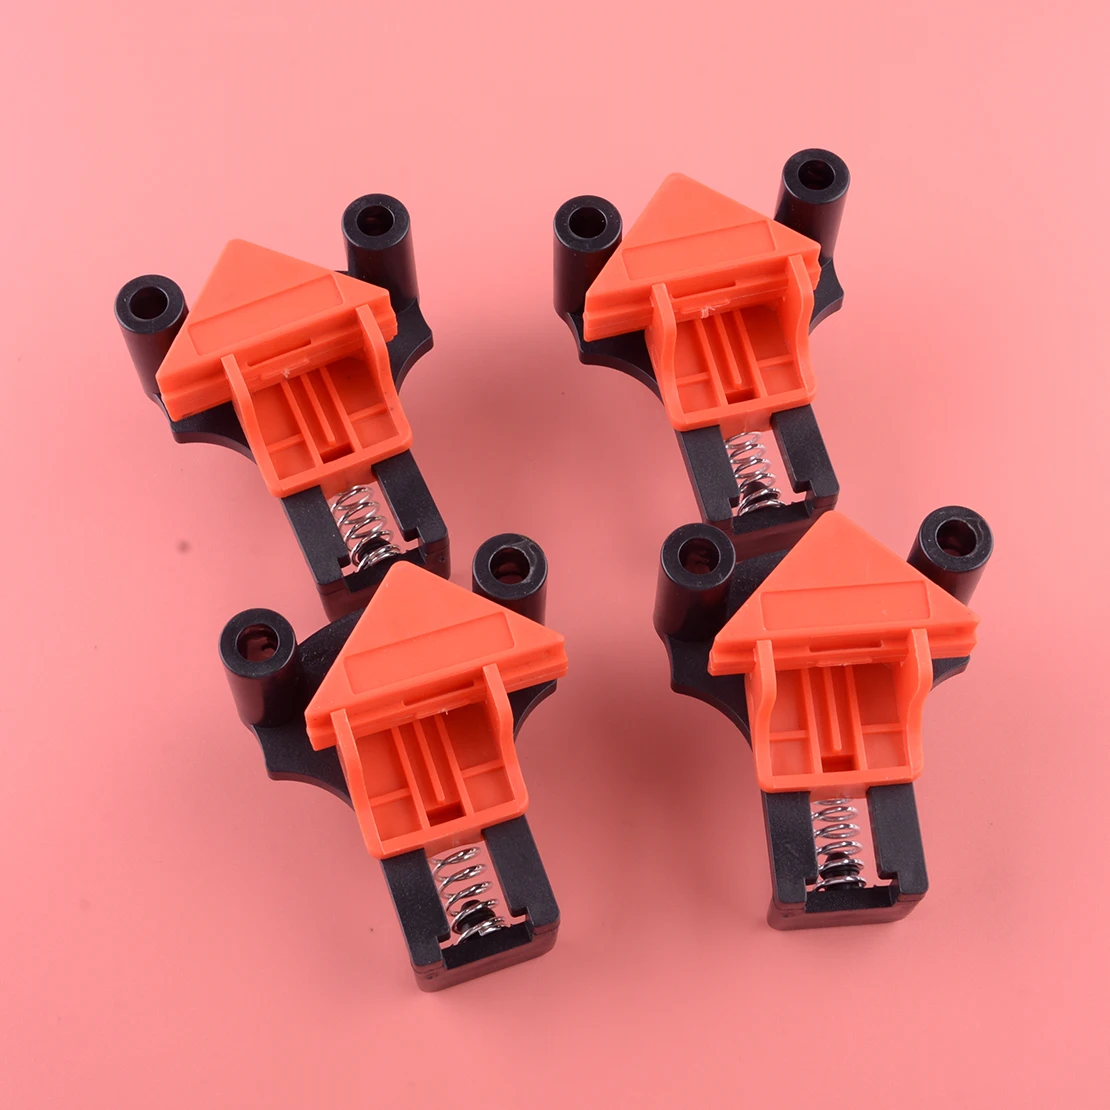 

4pcs 60 90 120 Degree Right Angle Clamps Corner Tools Fixing Clips For Carpenter Wood-working Hand DIY Positioning Fixture